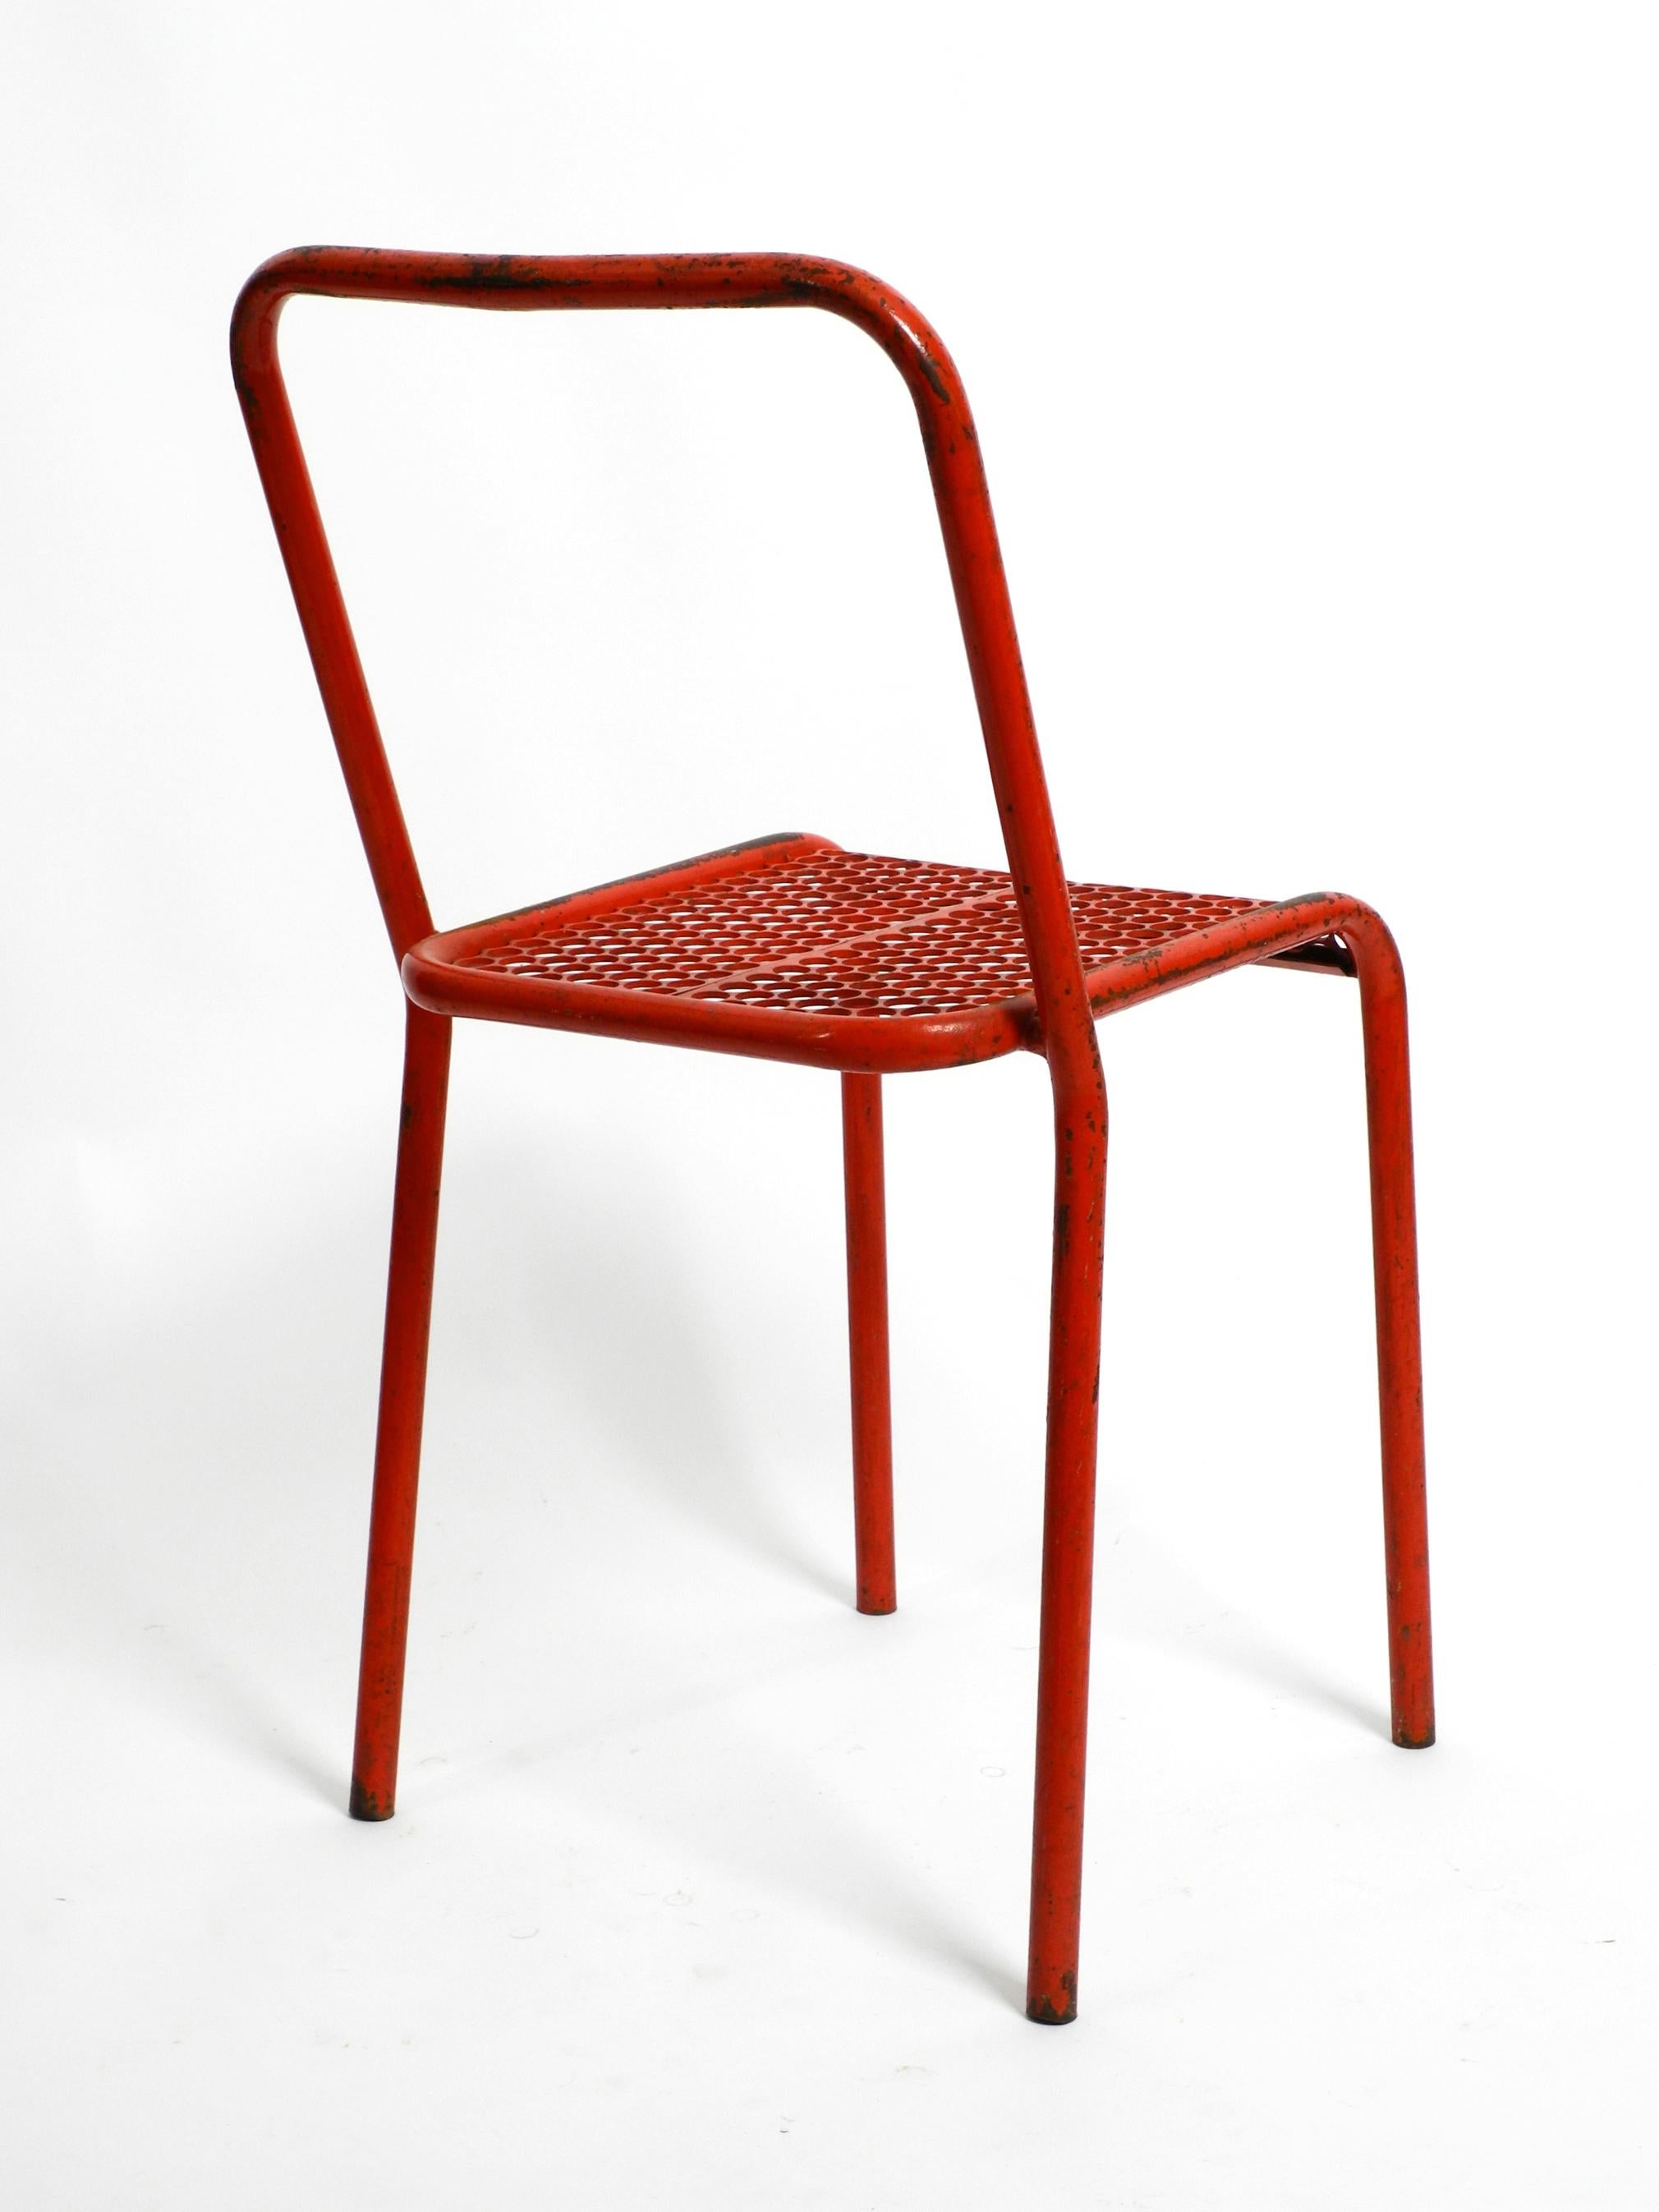 Four 1940s Industrial Metal Chairs by Réne Malaval in Their Original Red Color 1